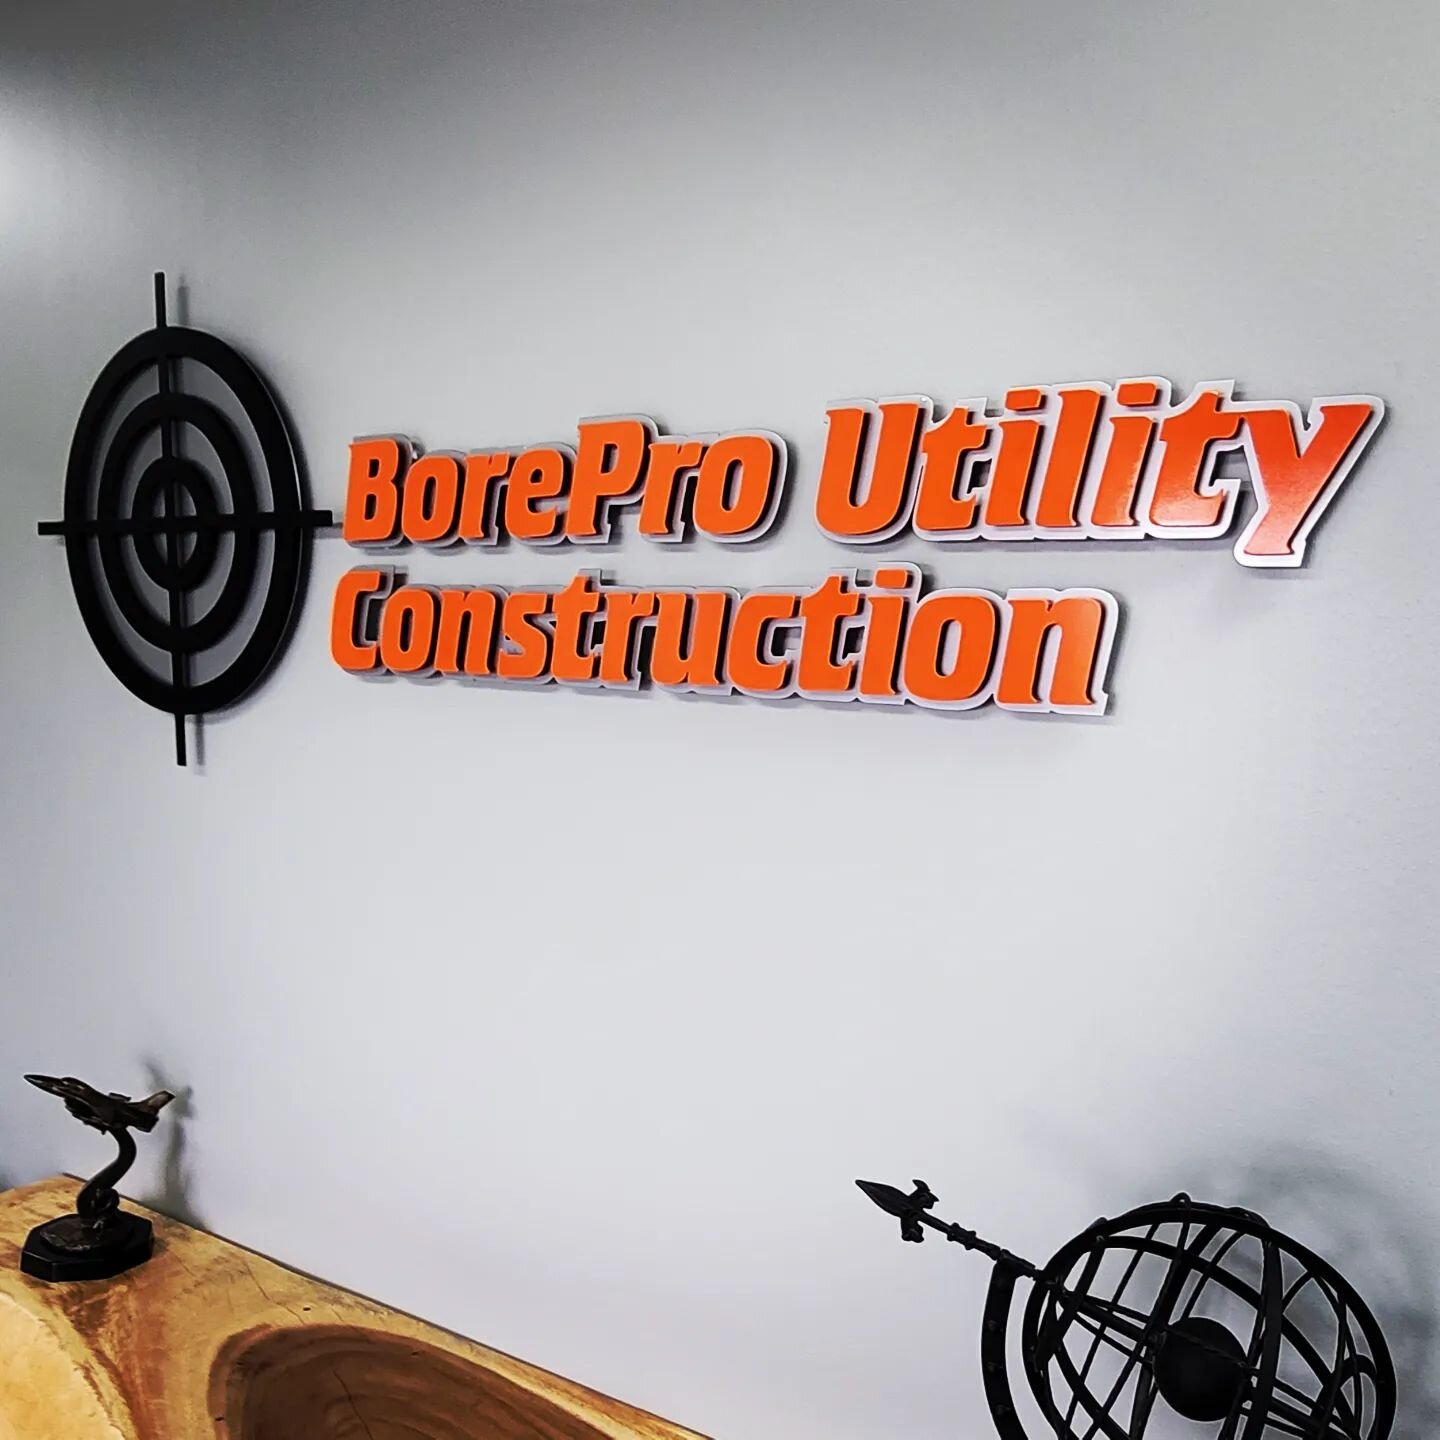 Lobby sign for our friends at Brepro Utility Construction in Austin.

#graphicdesign #steeldesign #weldernation #powdercoating #cncart #cncsigns #austintx #austinsigns #austintexas #entrancedecor #entrepreneurlife #roundrocktx #huttotx #